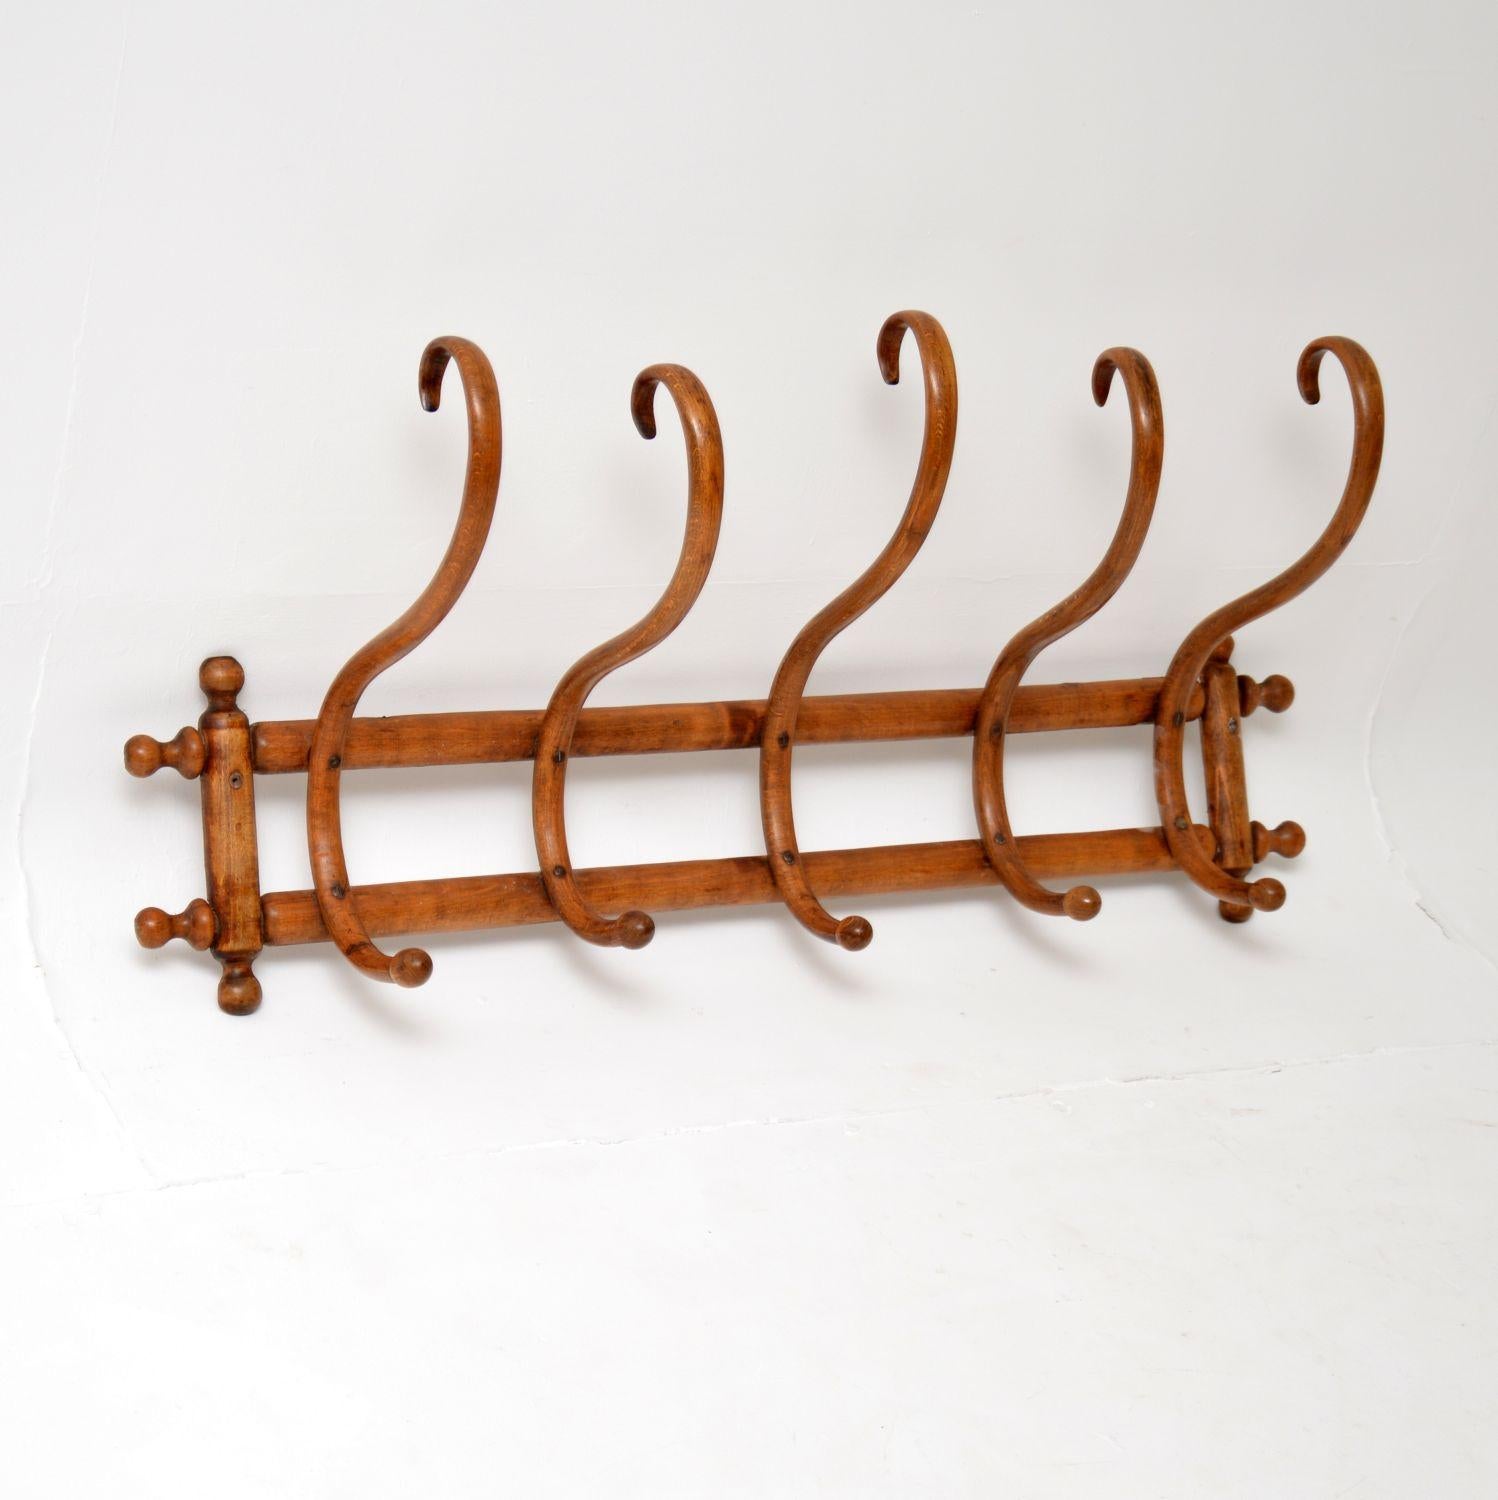 An excellent antique bentwood wall mounting hat and coat rack. Most likely made by Thonet in Austria, this dates from around the 1900 period.

It is a charming and useful item, with plenty of character.

We have recently had this re-polished, it